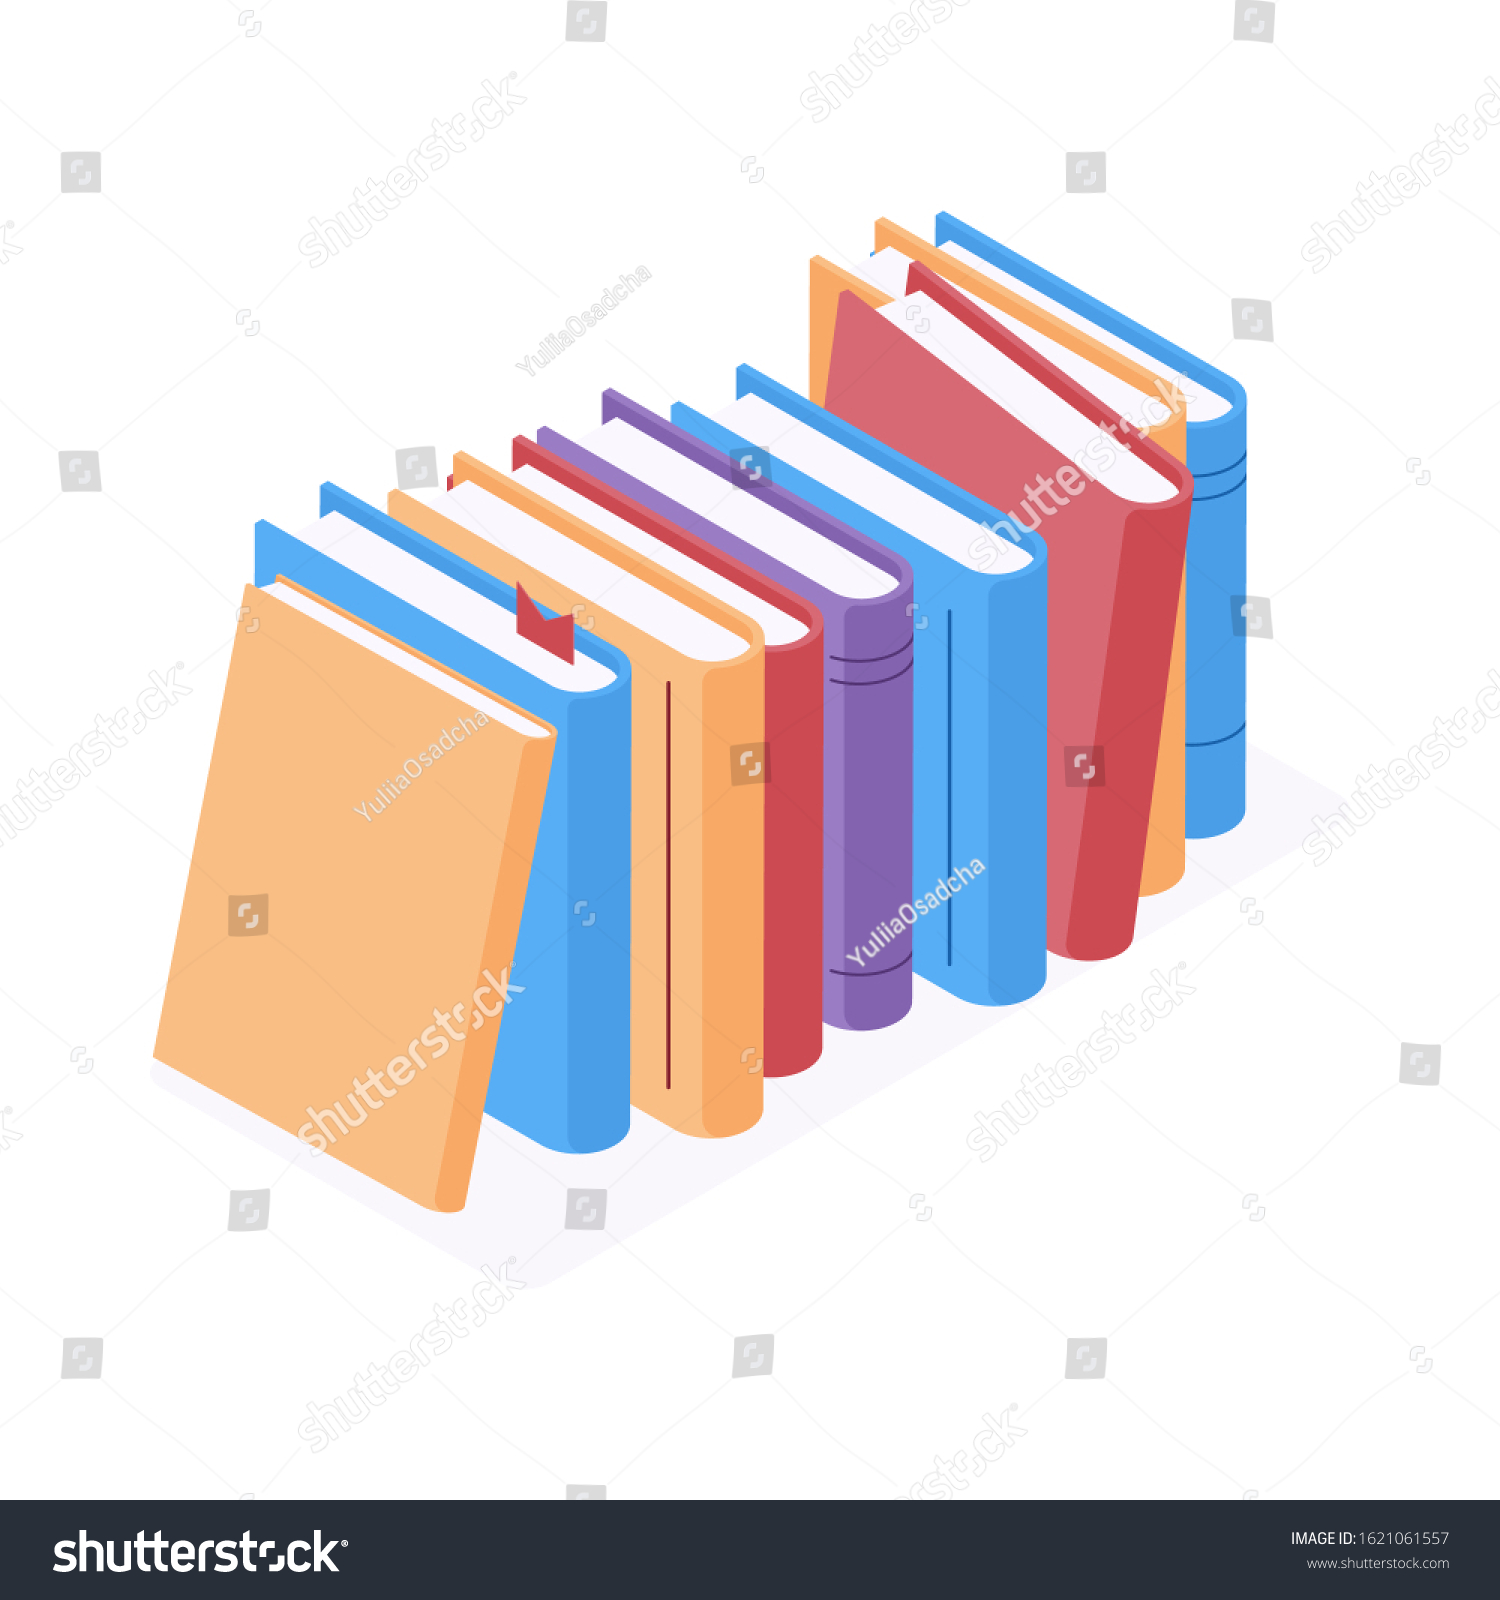 Stack Standing Books Isometric Vector Illustration Stock Vector Royalty Free